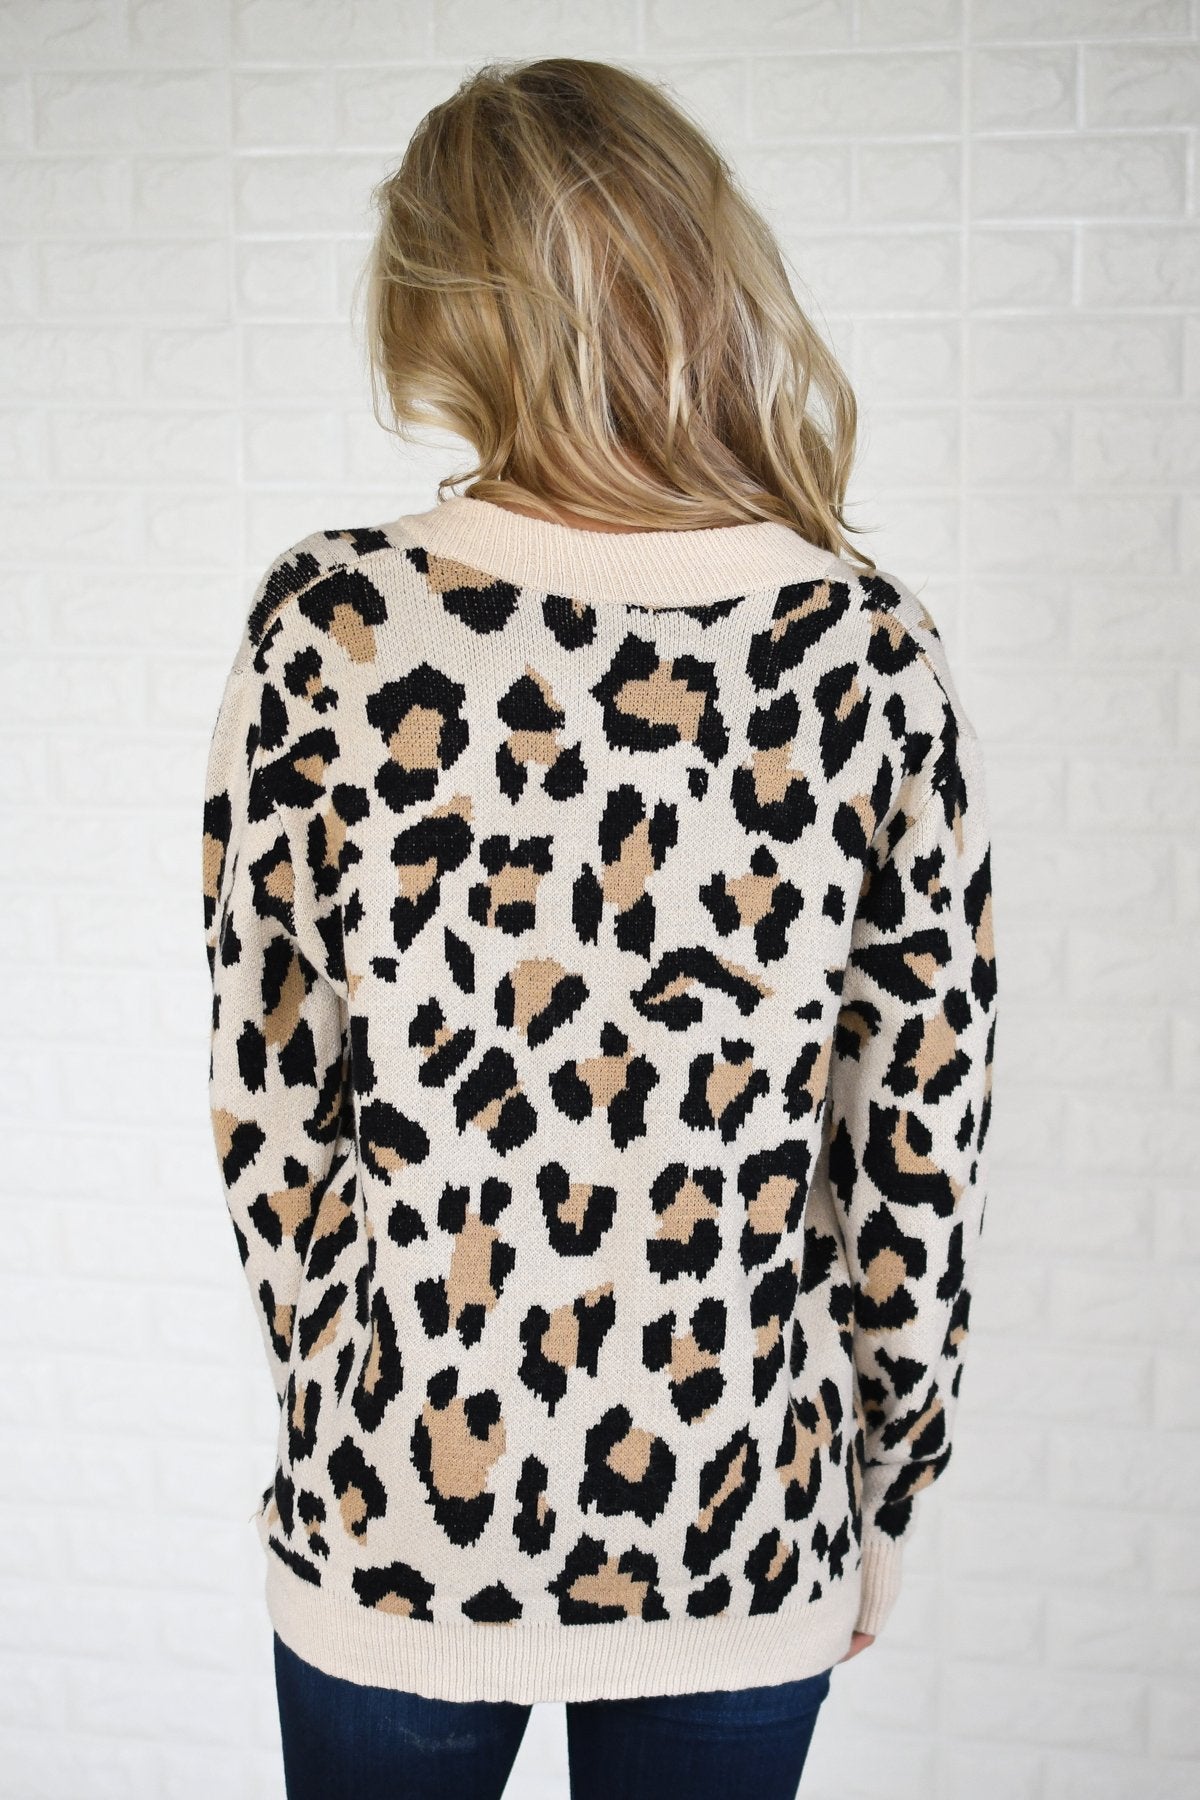 Running Wild Lace Up Leopard Top